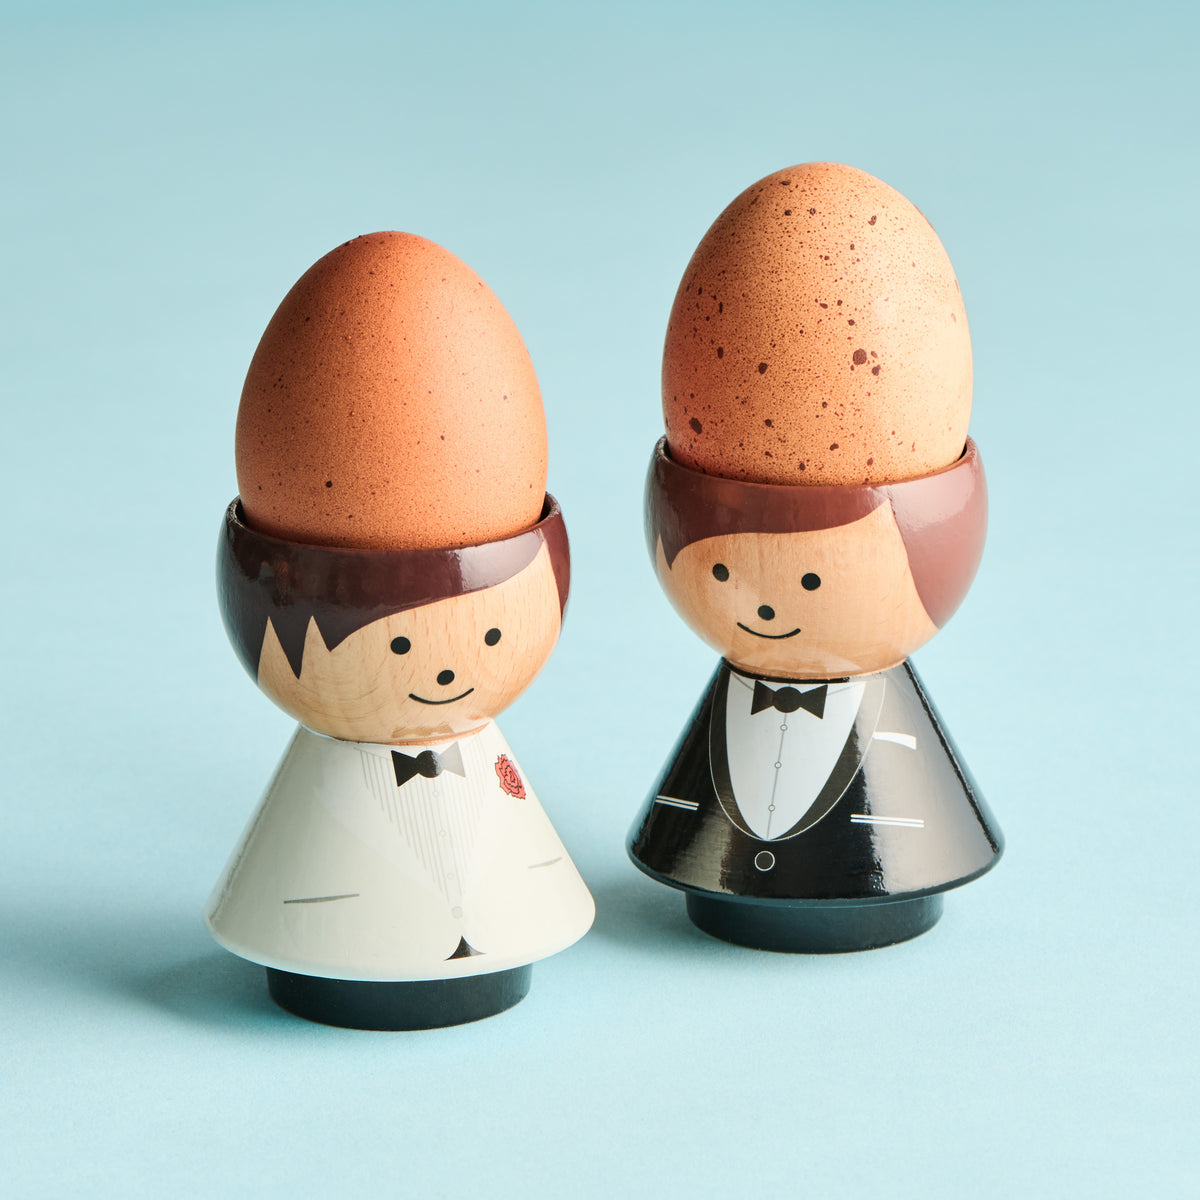 The James Egg Cup - Black Dinner Suit Edition